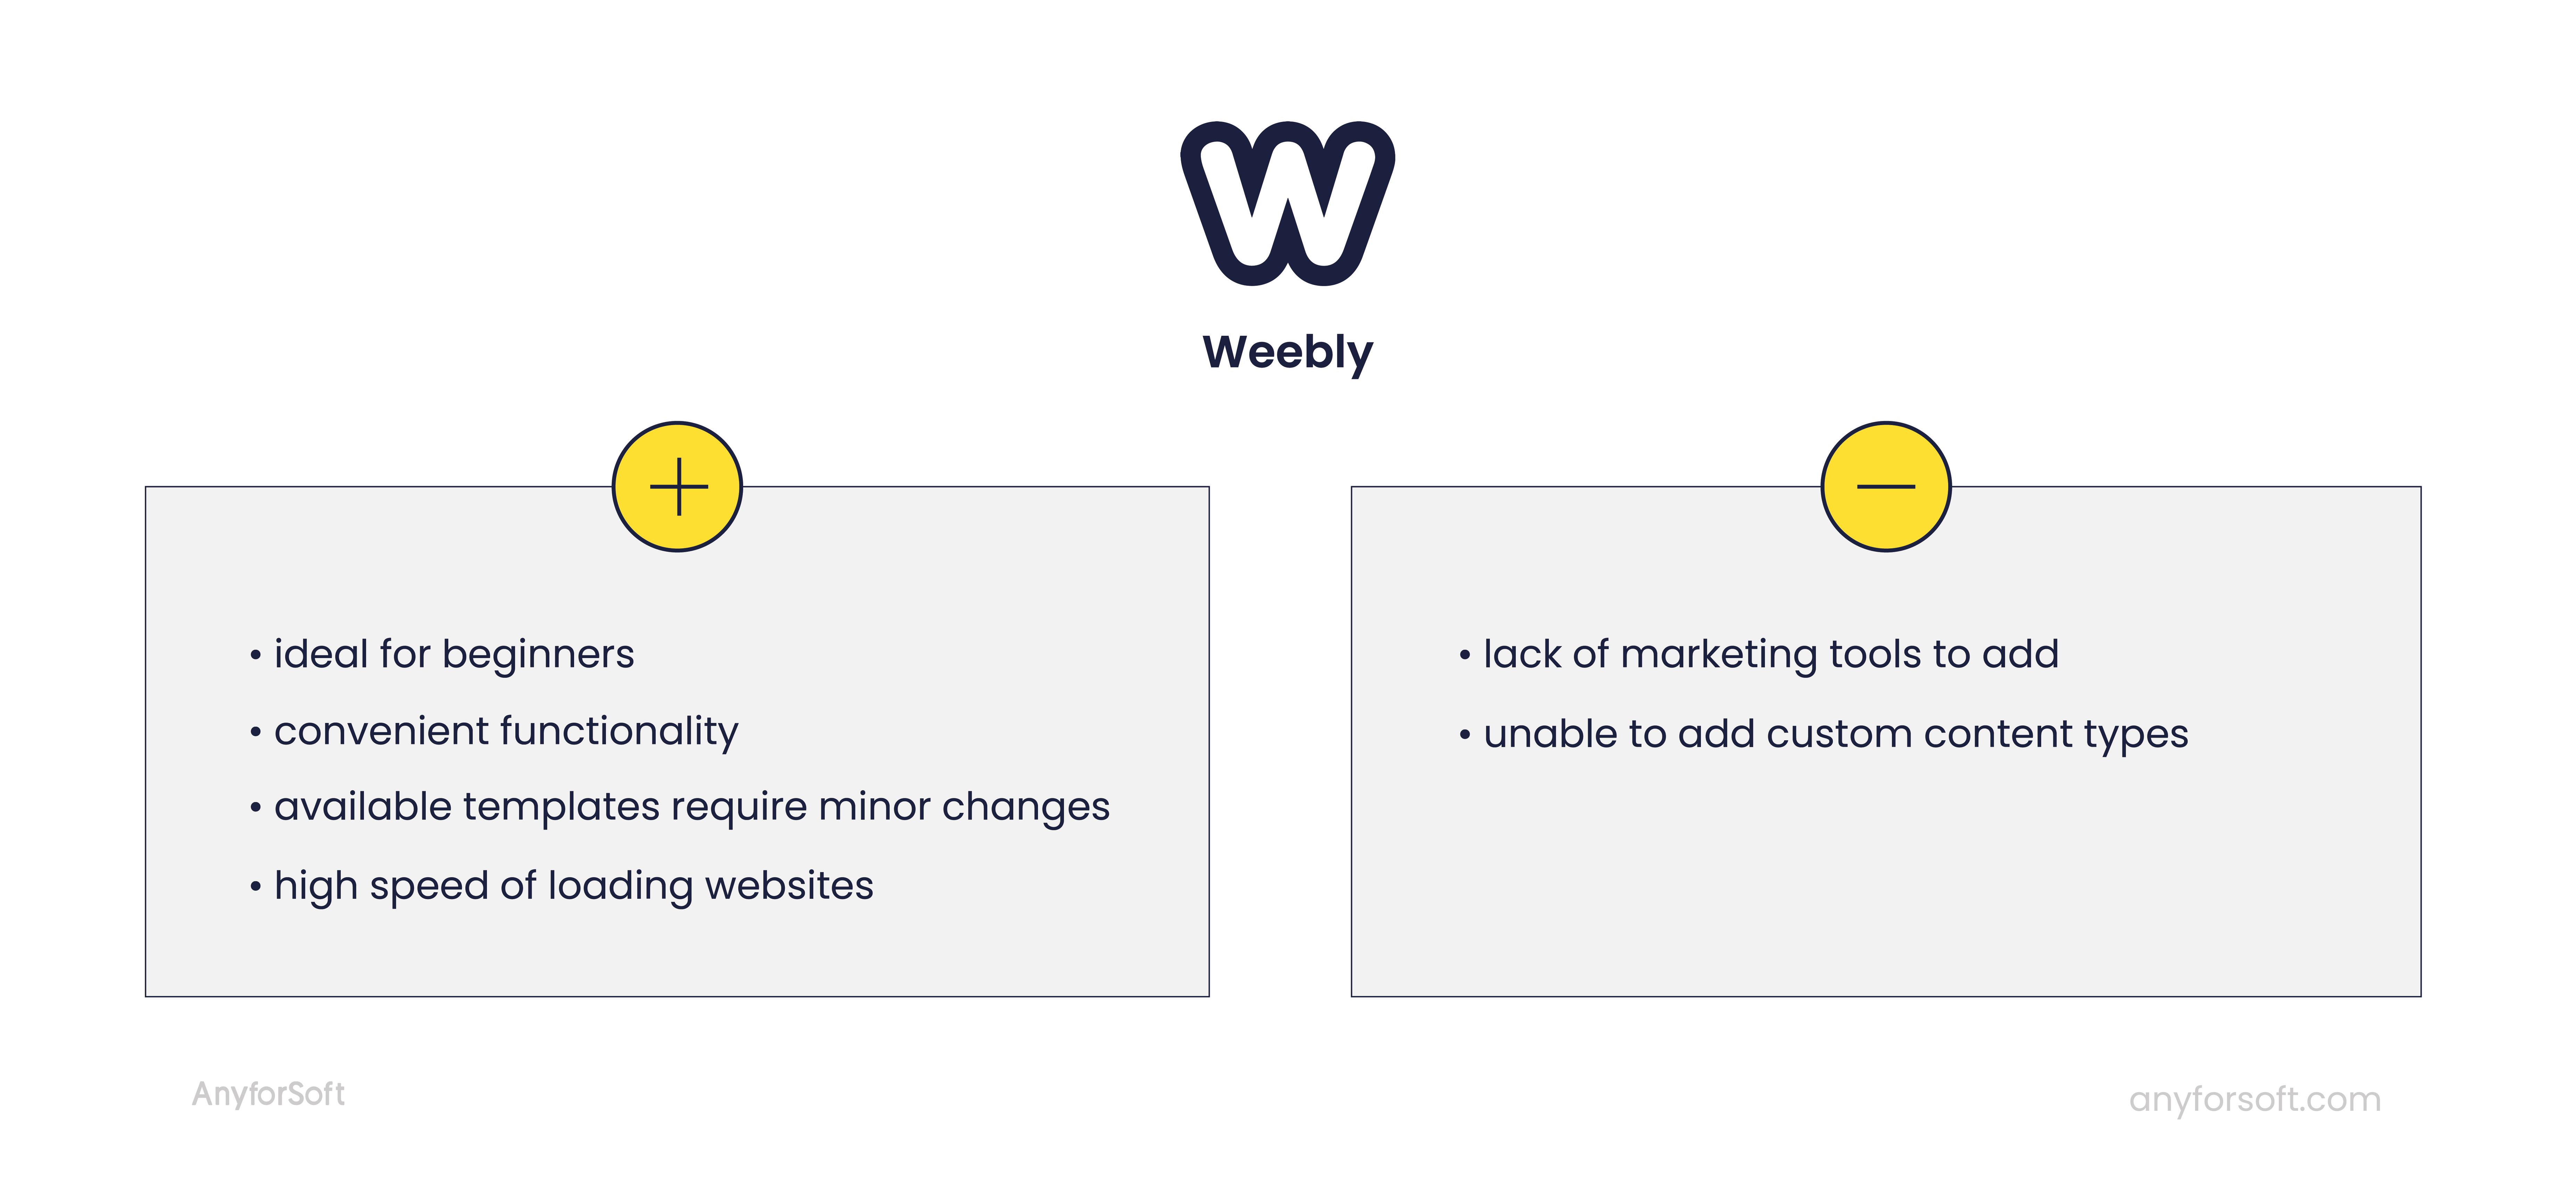 weebly pros and cons